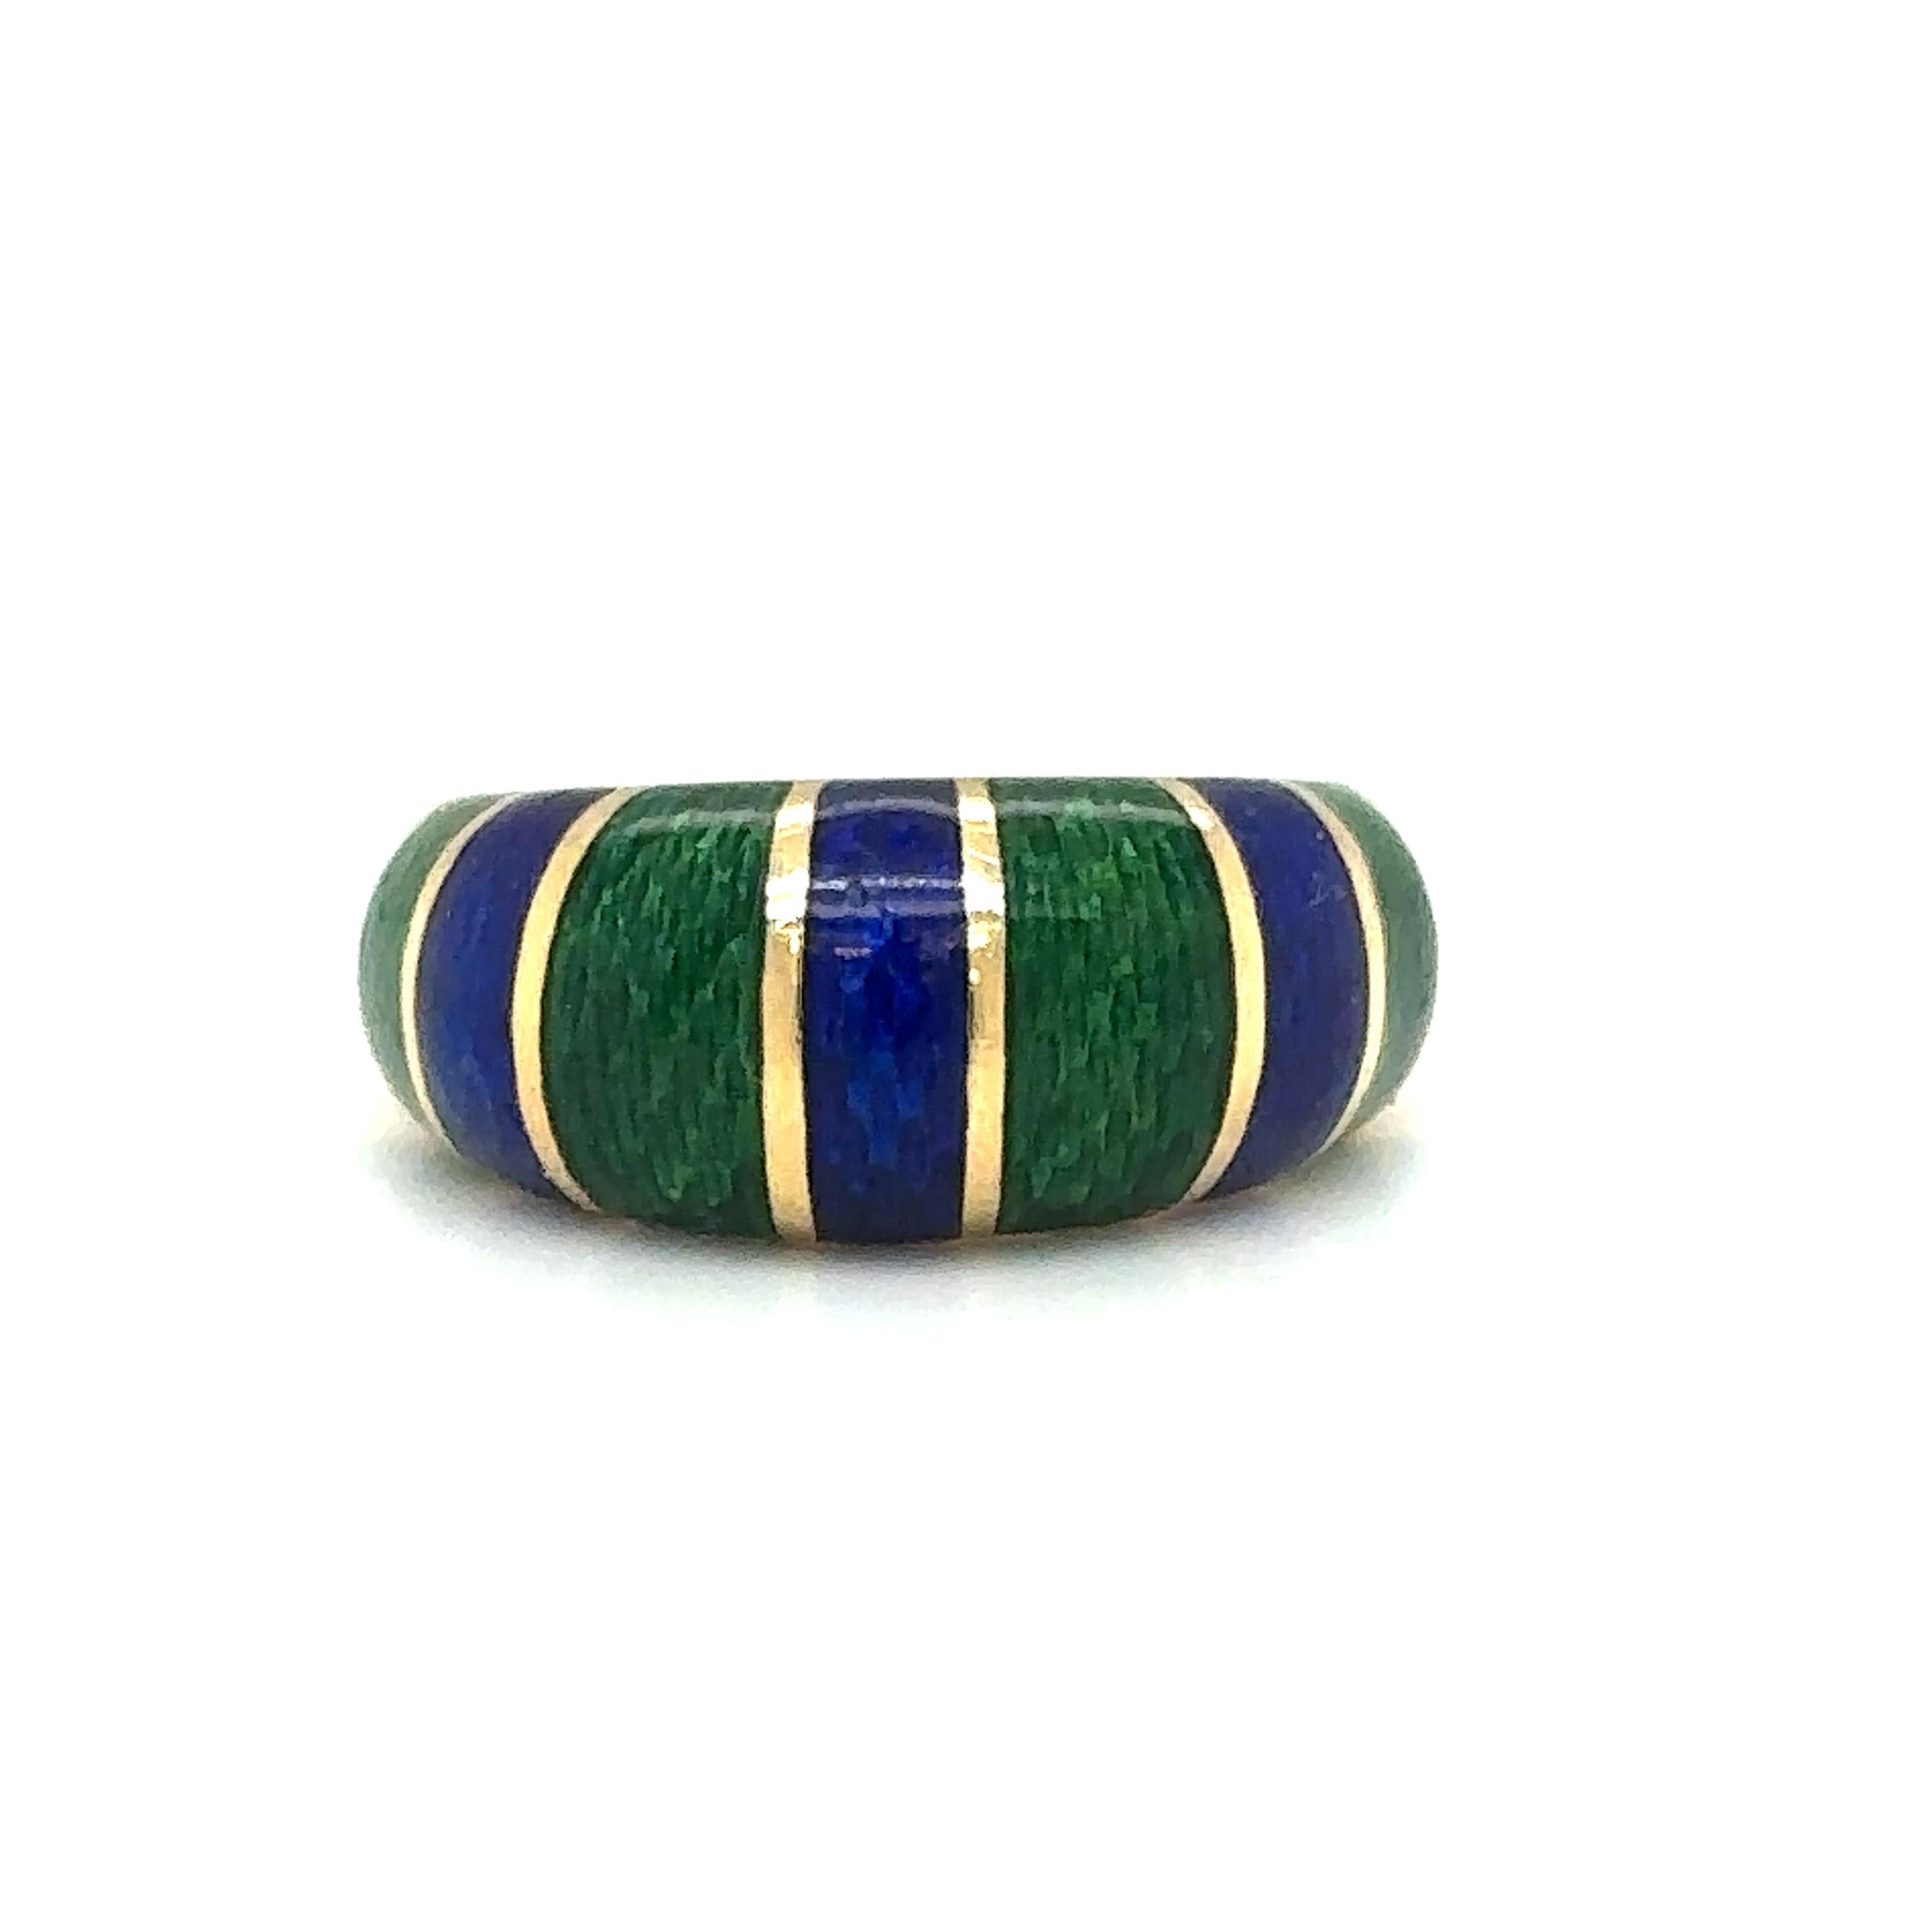 Item Details: This band by TIFFANY & CO. has green and blue enameling on a dome style band.

Circa: 1960s
Metal Type: 18 karat yellow gold
Weight: 5.4 grams
Size: US 6, resizable
